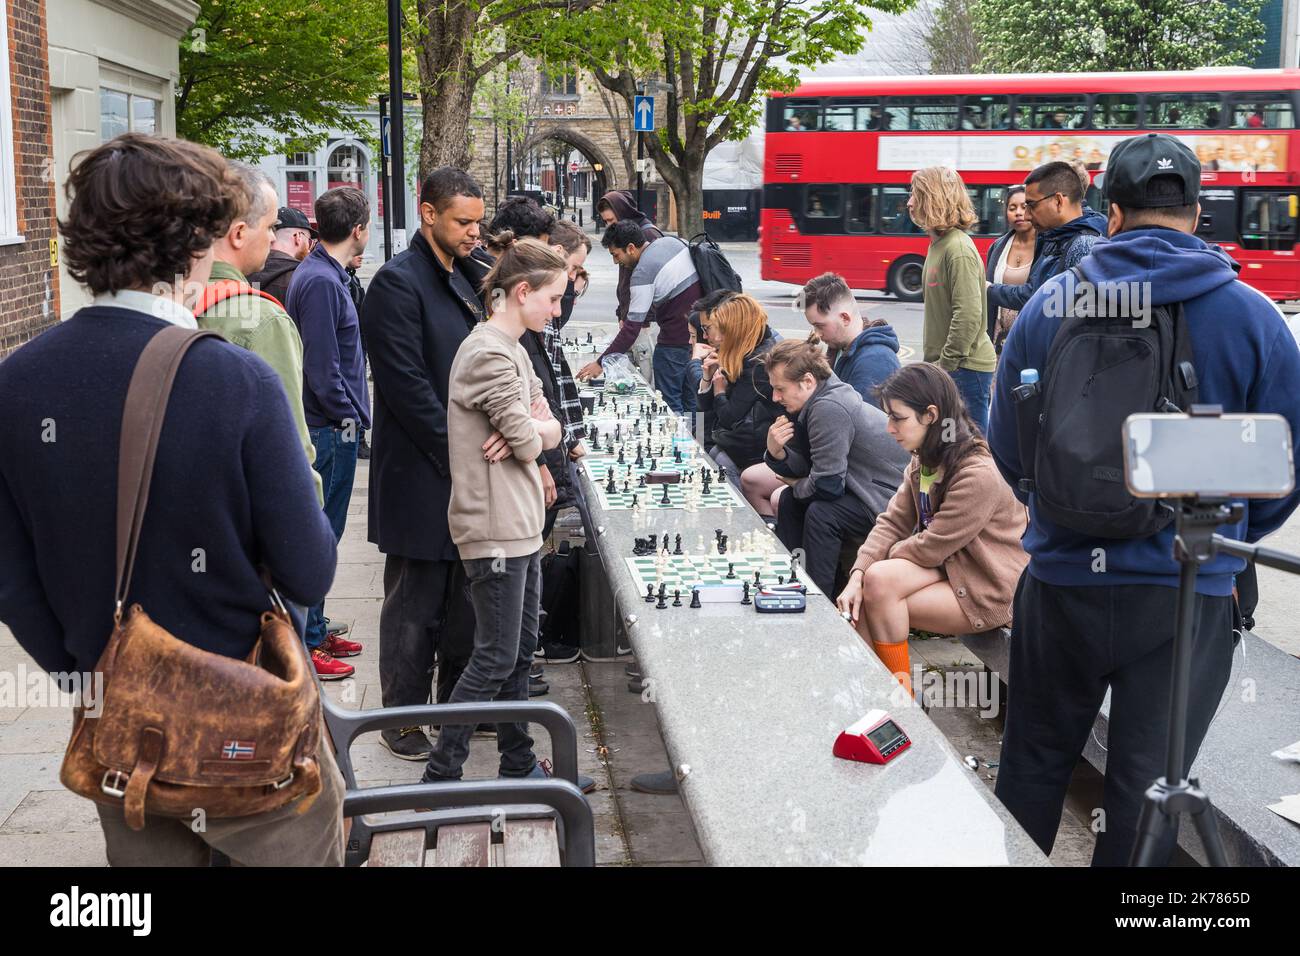 Open air chess players in London Stock Photo